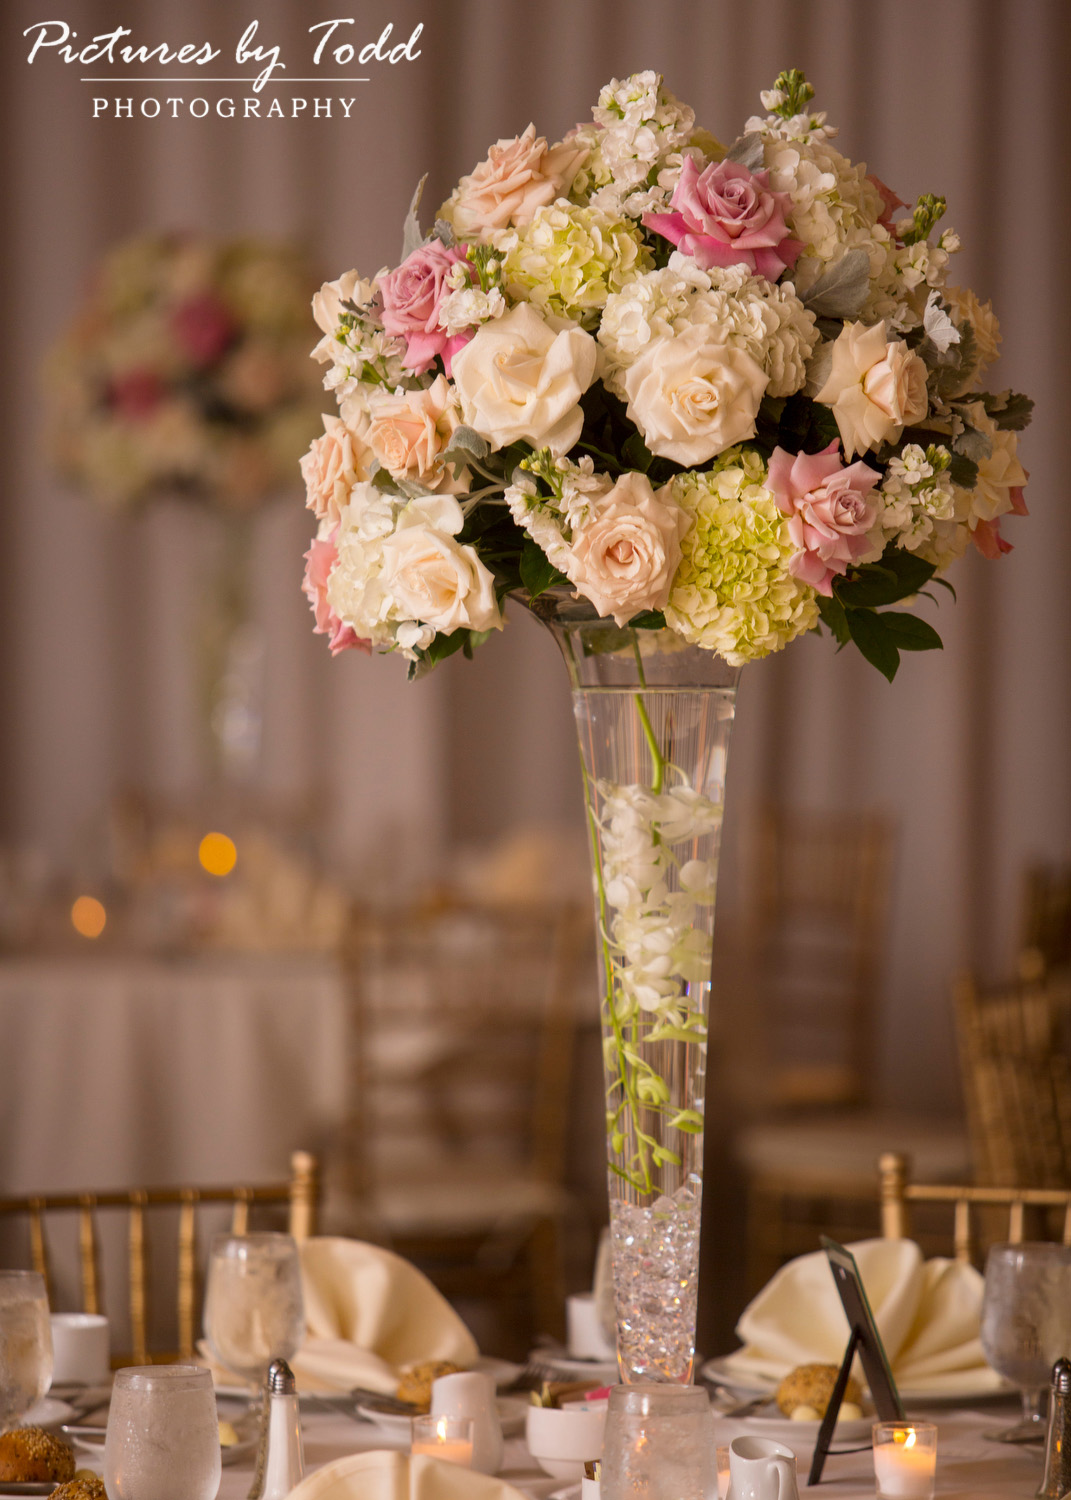 Westin-Hotel-Pictures-By-Todd-Carl-Alan-Floral-Design